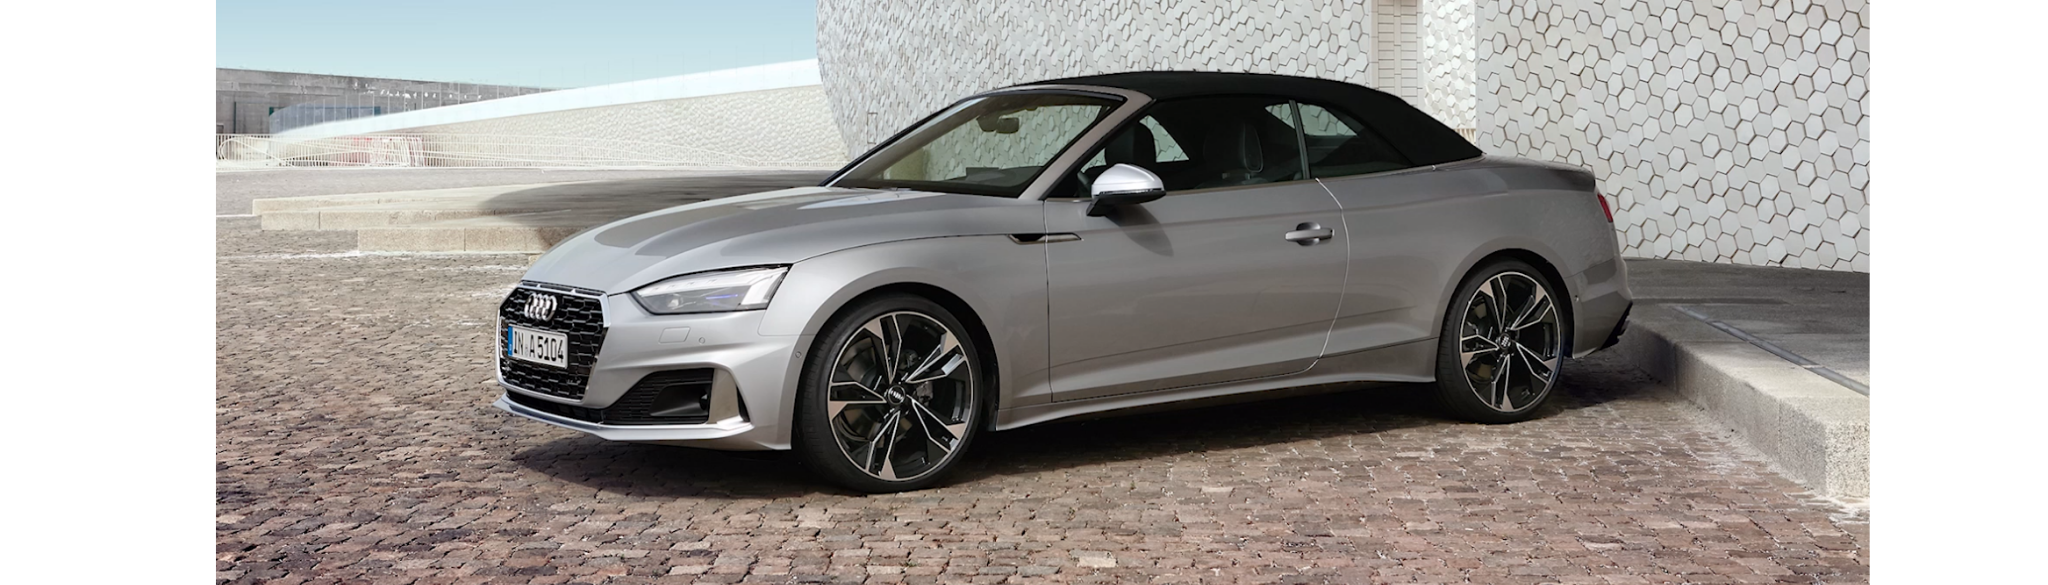 Silver A5 cabriolet with roof up